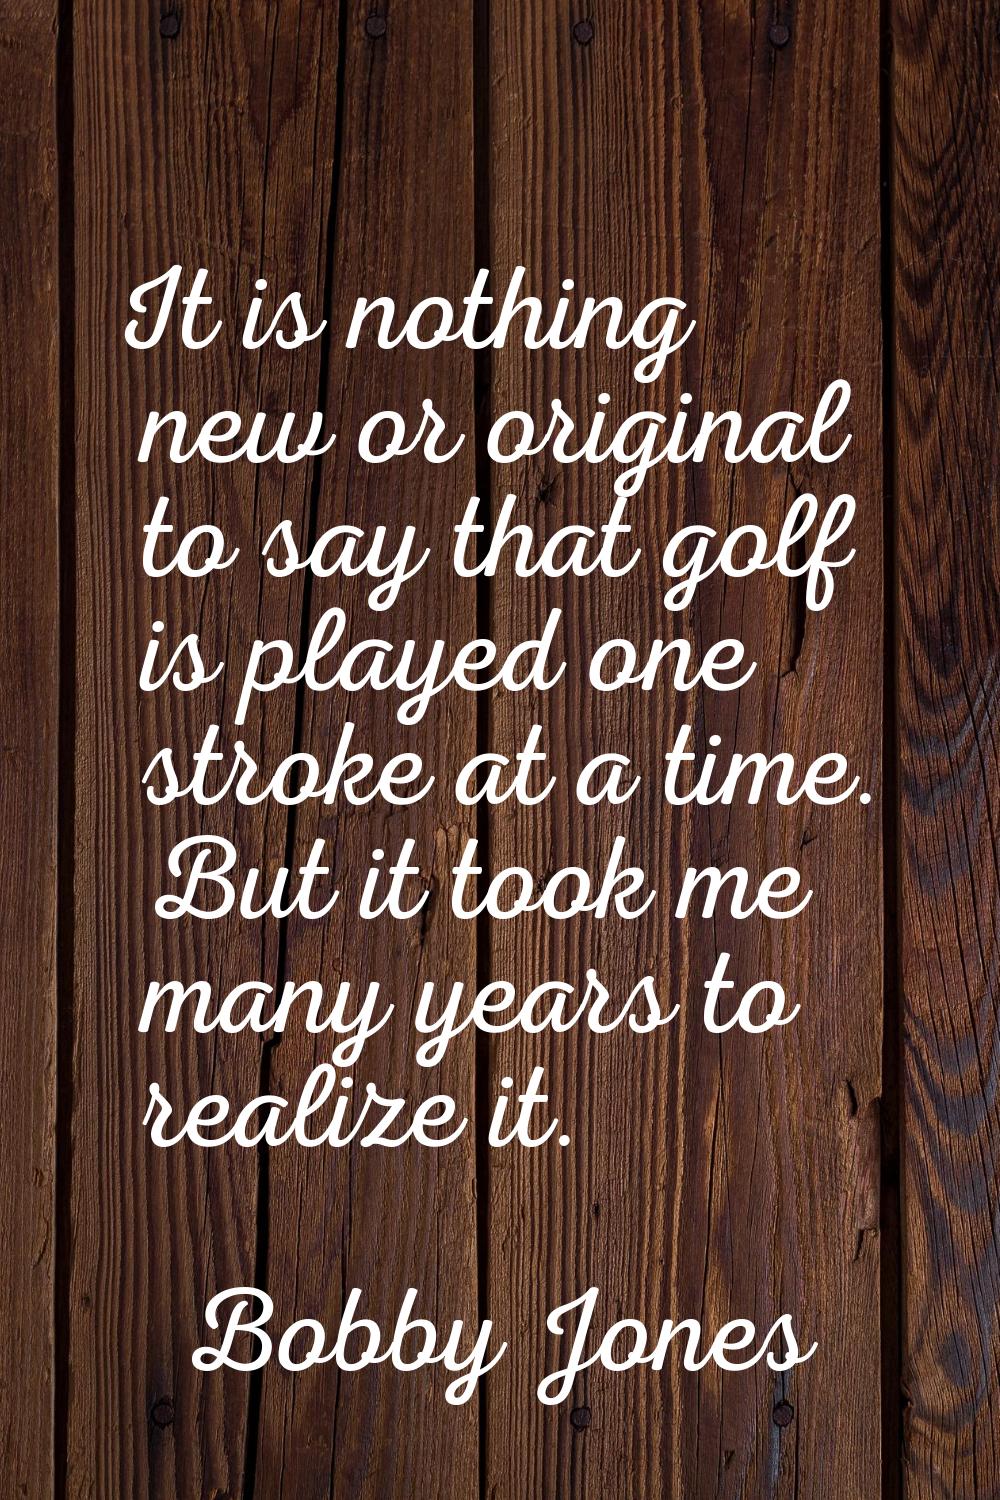 It is nothing new or original to say that golf is played one stroke at a time. But it took me many 